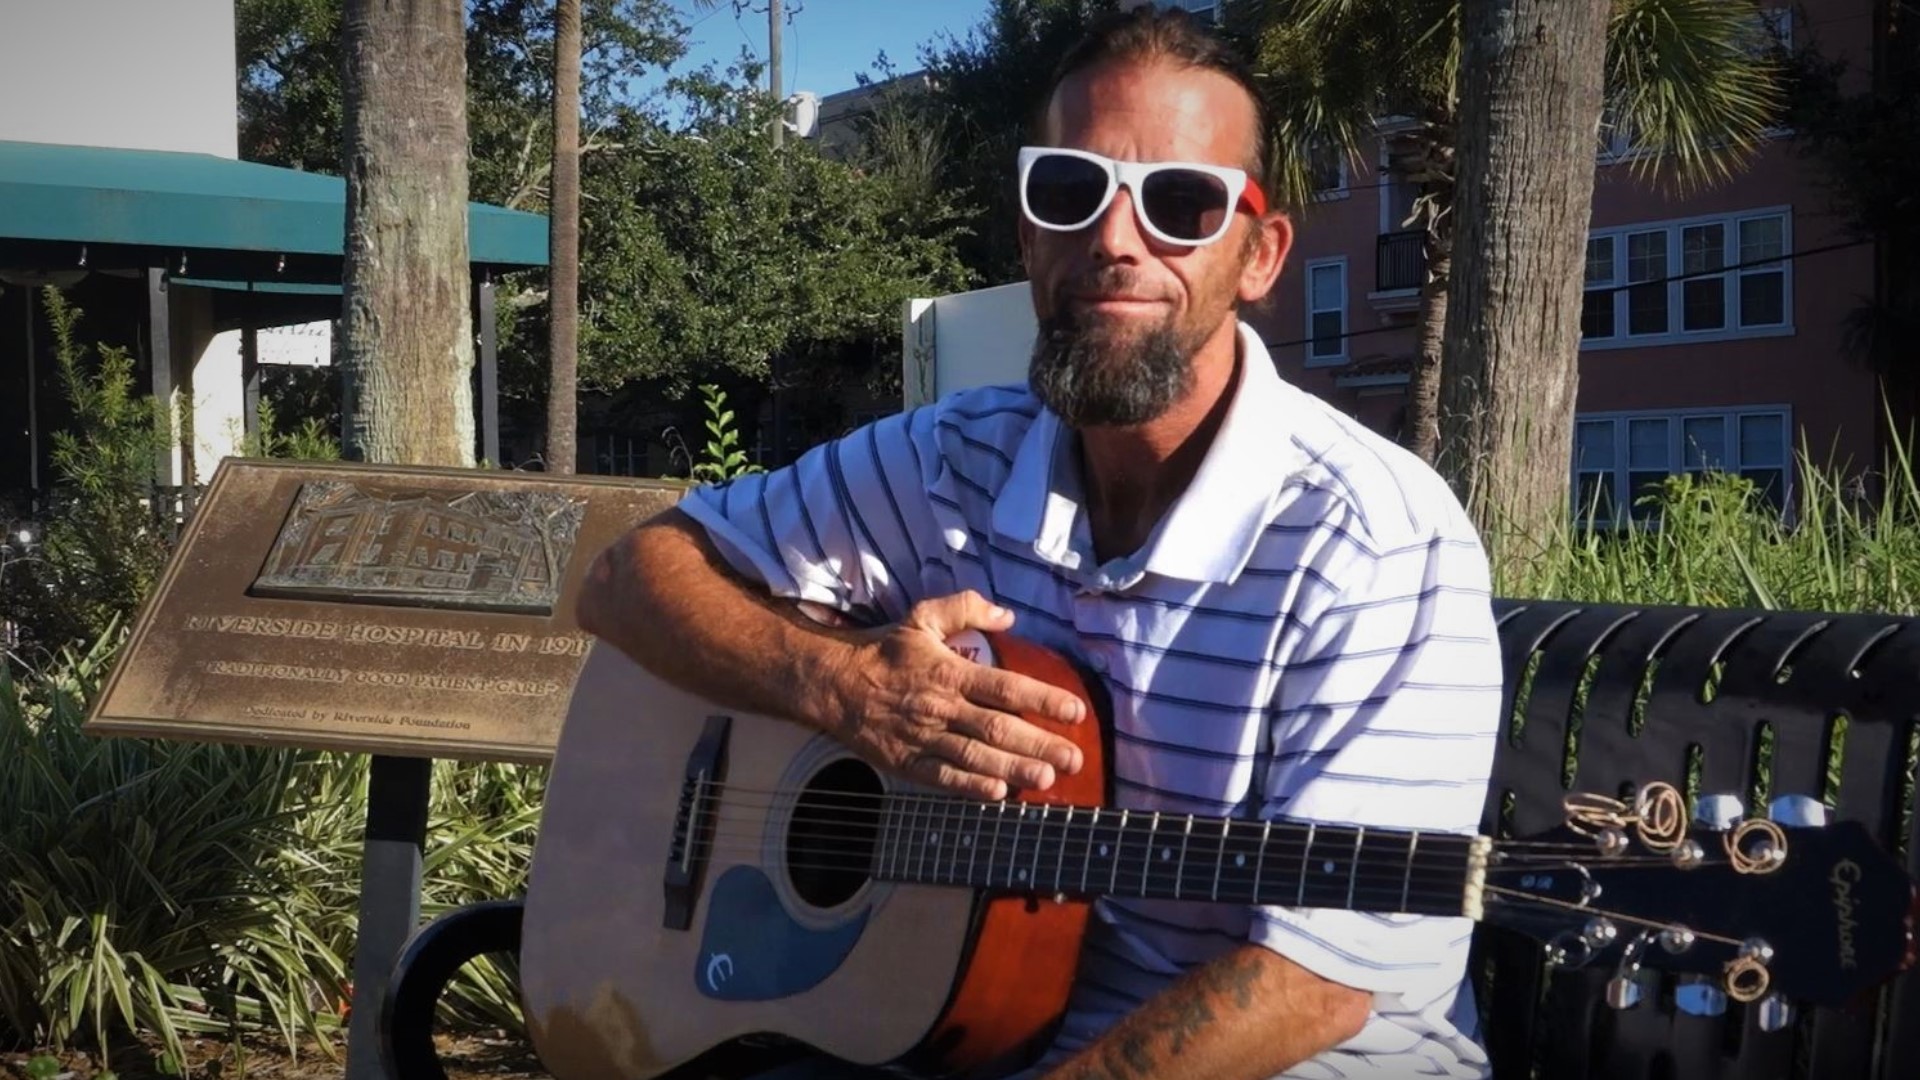 "They think homeless people are wackadoo, crazy ... or that they're all on drugs. They're not all on drugs though." -- Chevy Ethridge, Jacksonville street musician